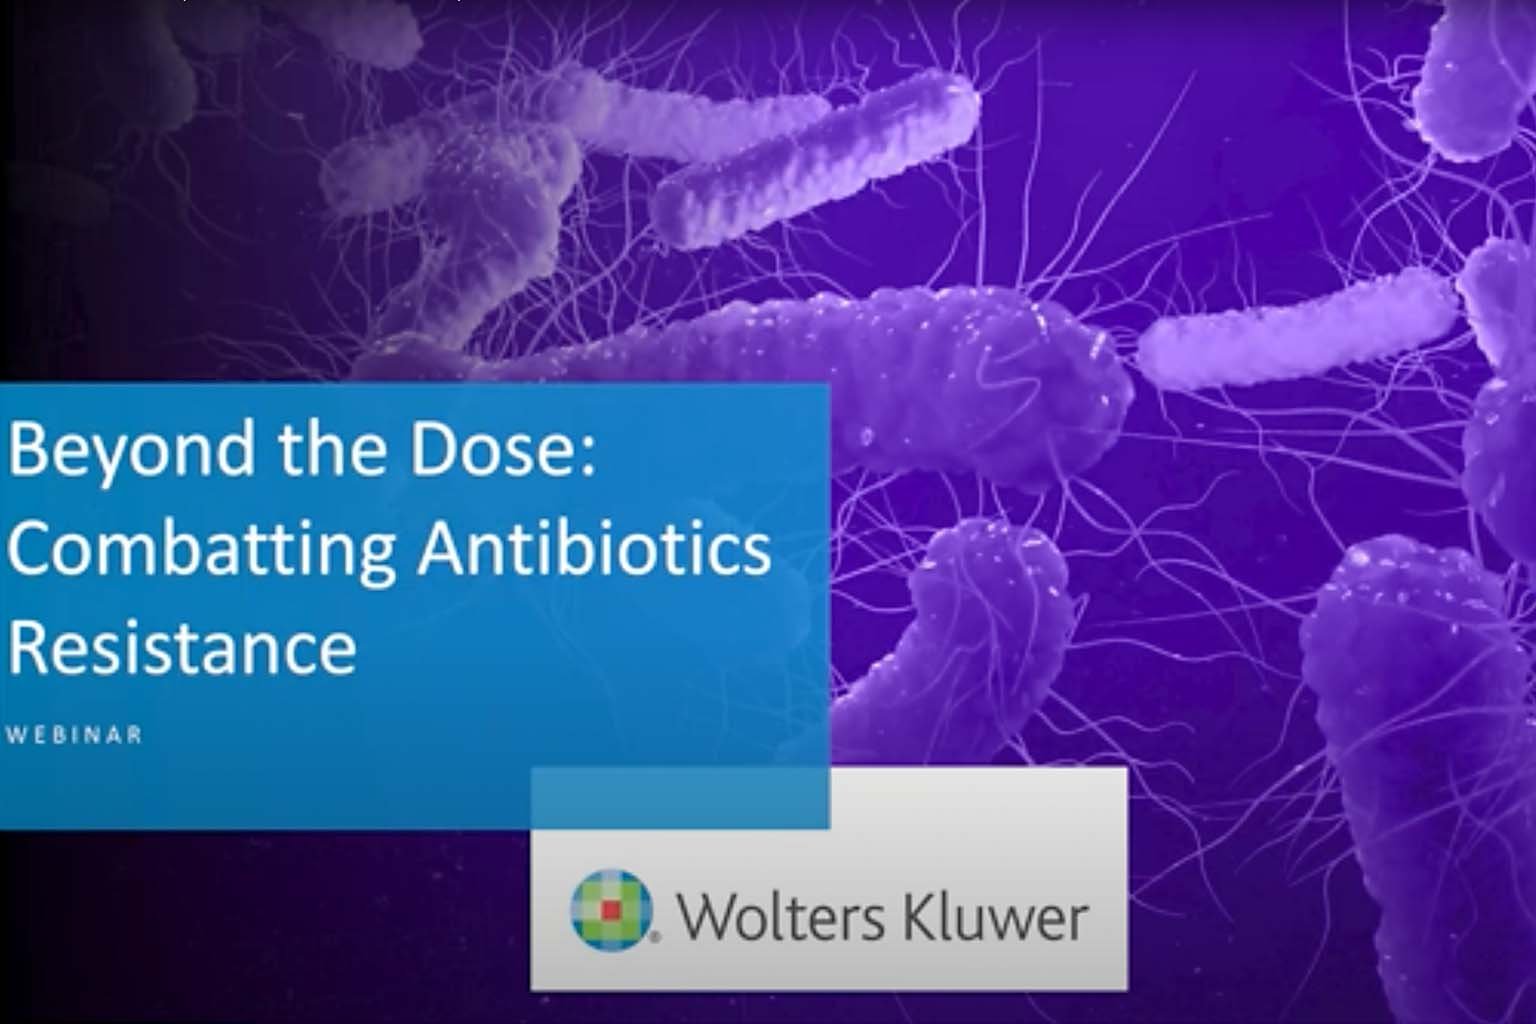 video screen - Experts discuss roadmap for antimicrobial stewardship